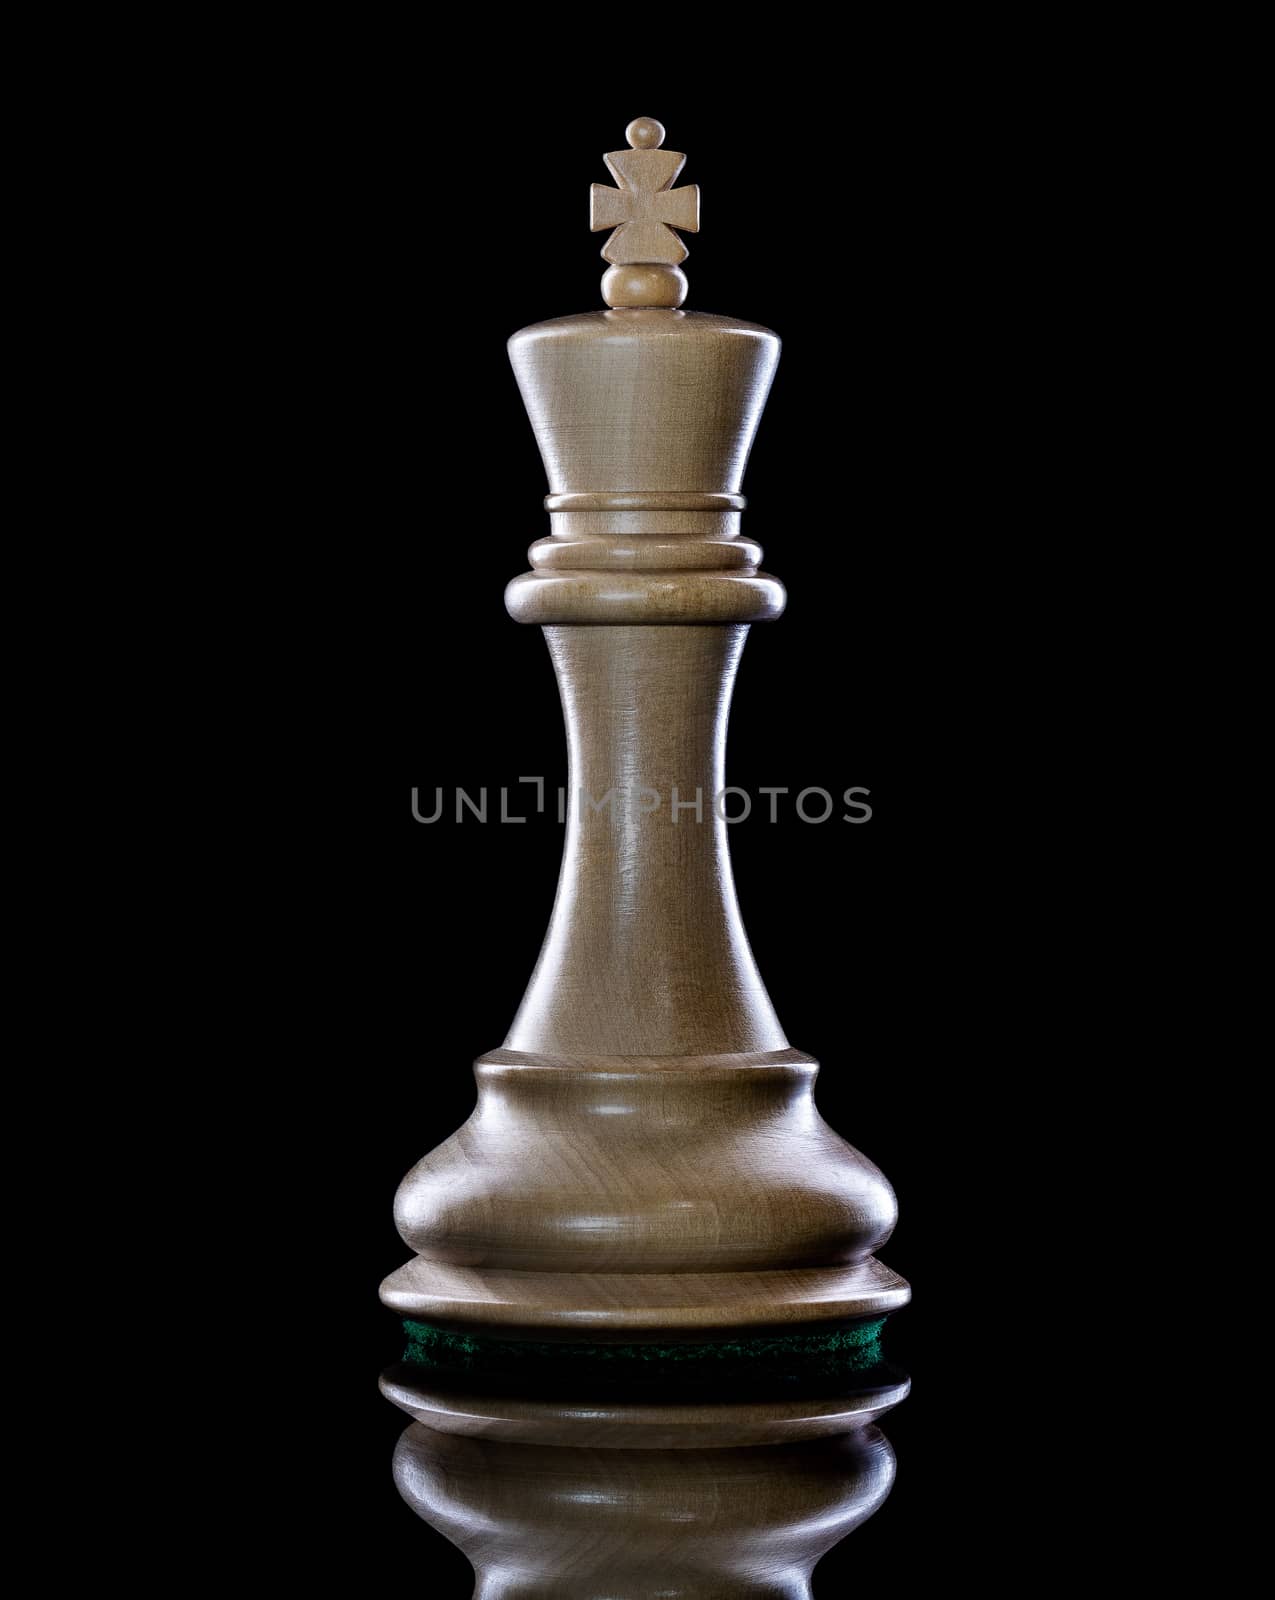 Black and White King of chess setup on dark background . Leader and teamwork concept for success. Chess concept save the King and save the strategy.